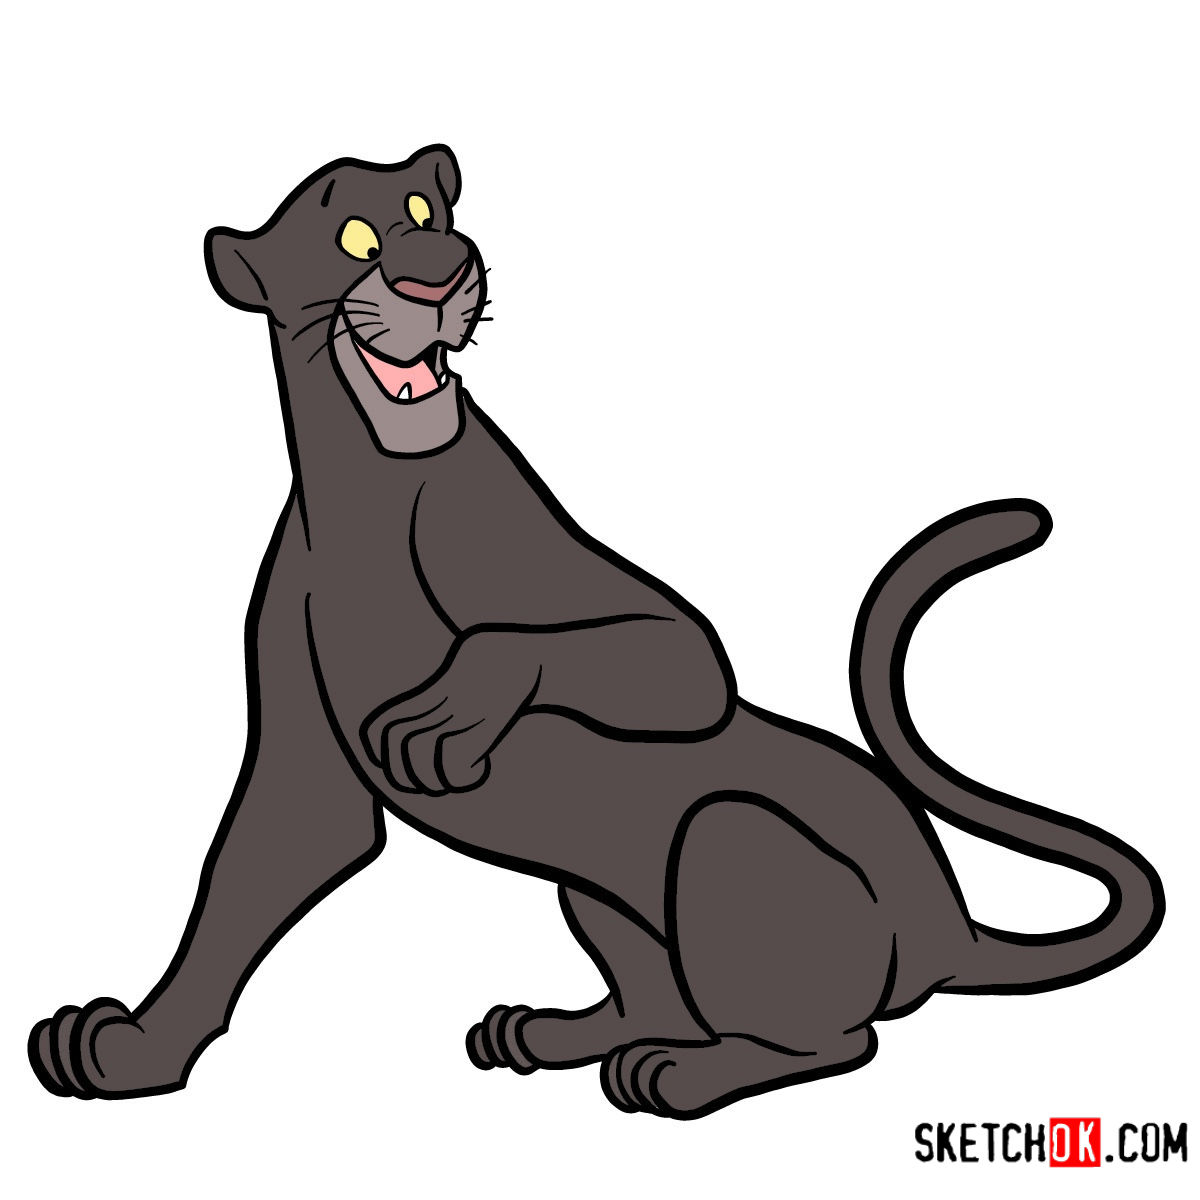 How to draw Bagheera the Panther - Sketchok easy drawing guides